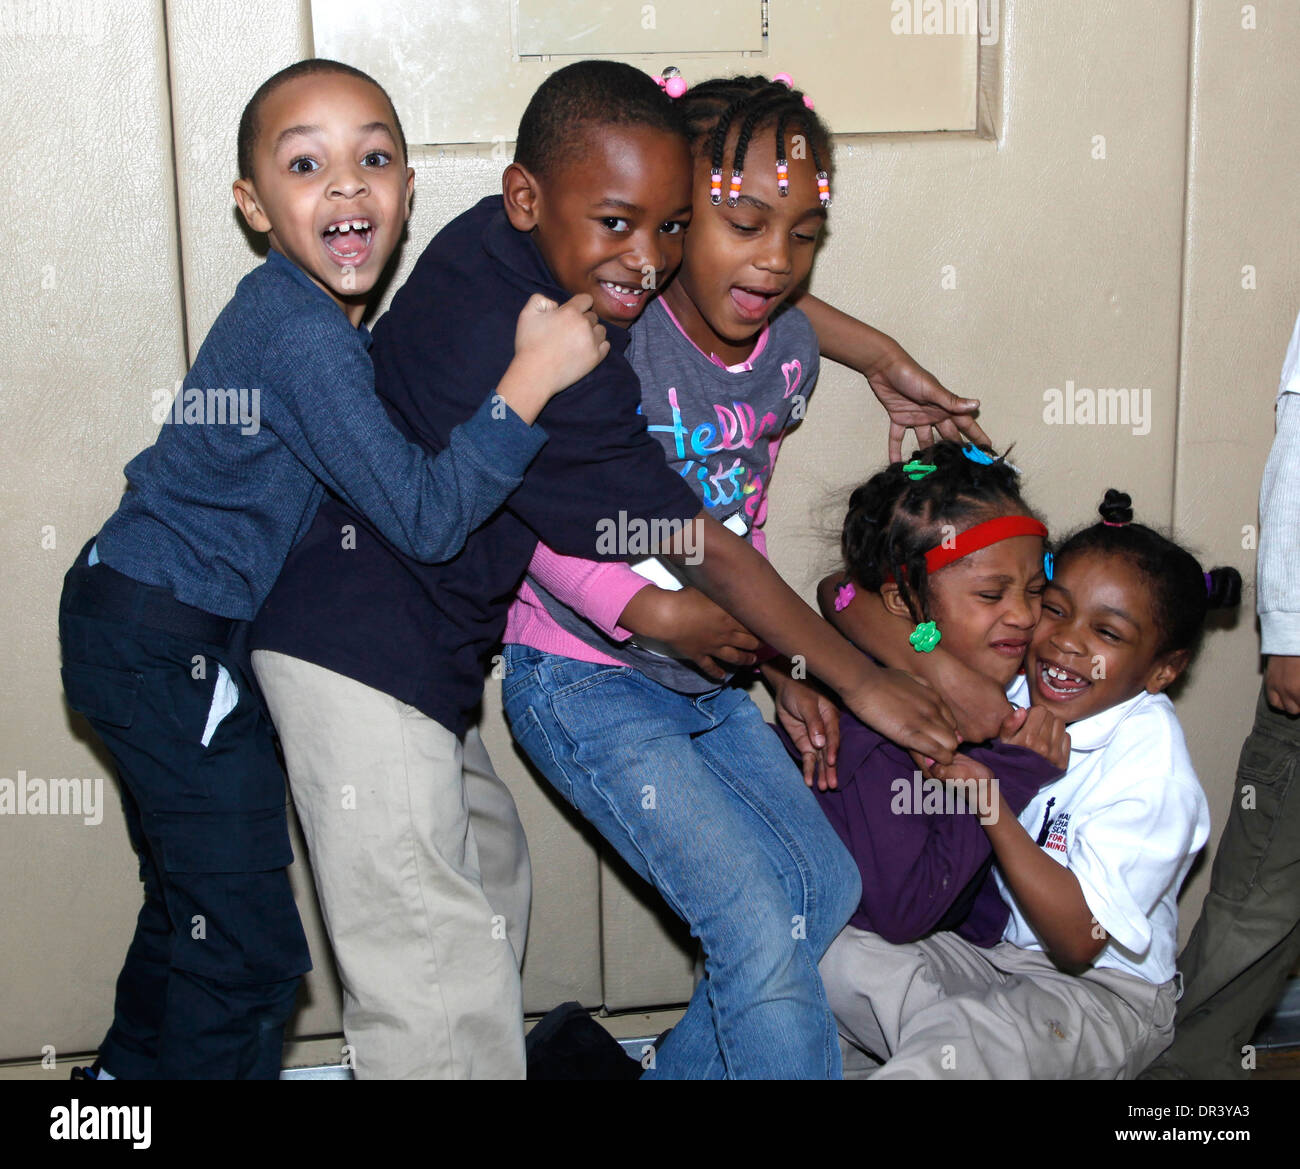 Children playing around for the camera at a community center after school program in New York City. Stock Photo